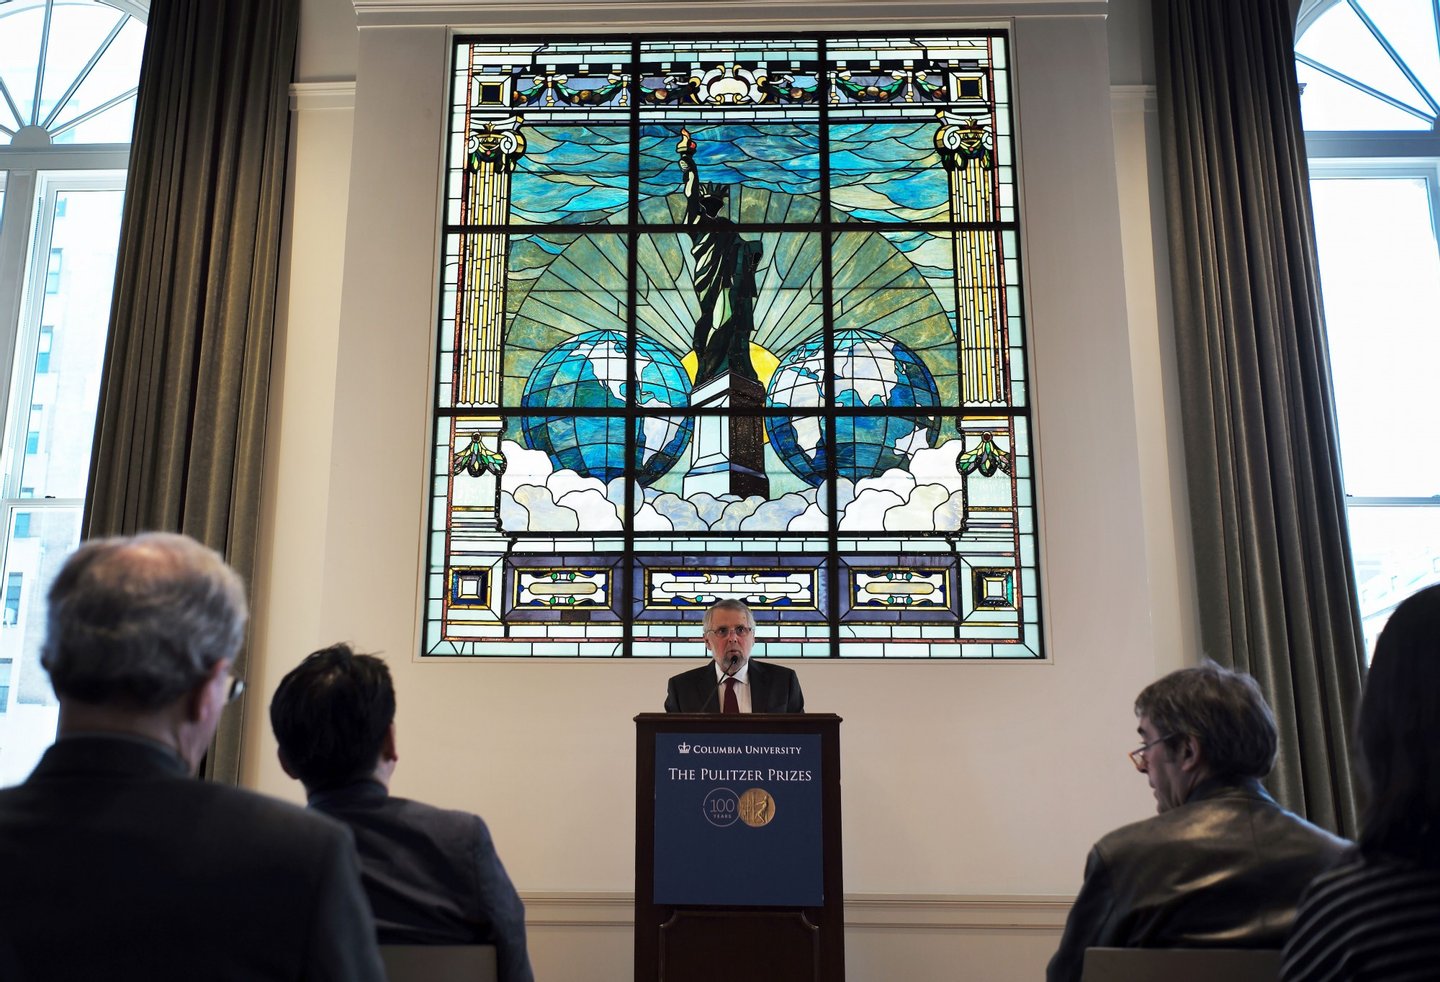 Mike Pride, administrator of The Pulitzer Prizes, announces the 2016 Pulitzer Prize winners at the Columbia University in New York on April 18, 2016. / AFP / Jewel SAMAD (Photo credit should read JEWEL SAMAD/AFP/Getty Images)